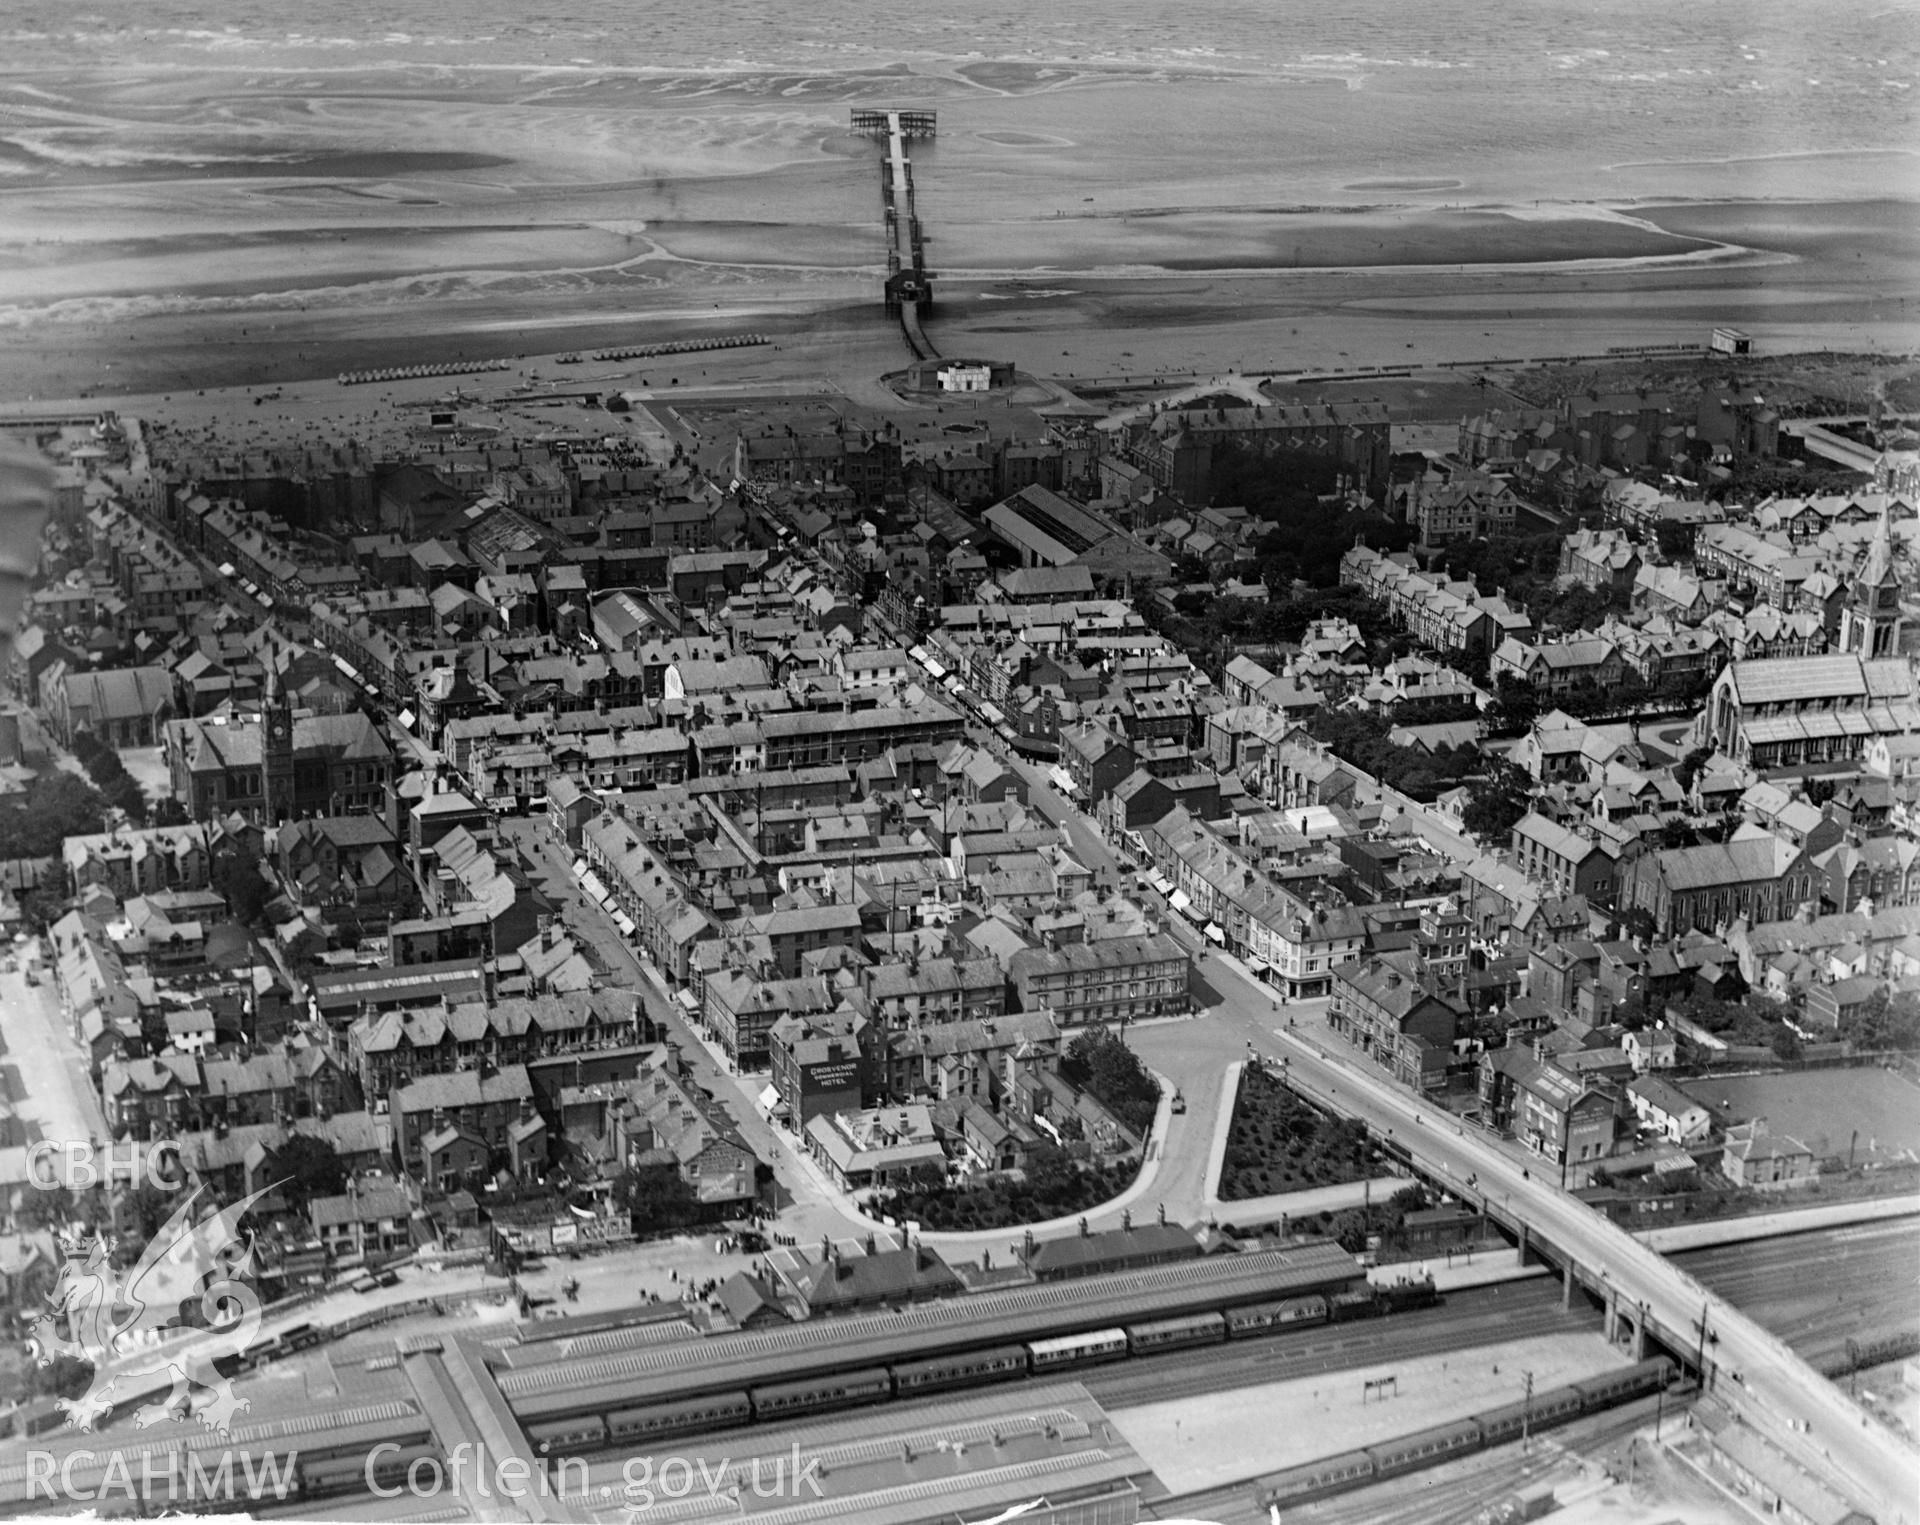 View of Rhyl showing railway station and pier, oblique aerial view. 5?x4? black and white glass plate negative.